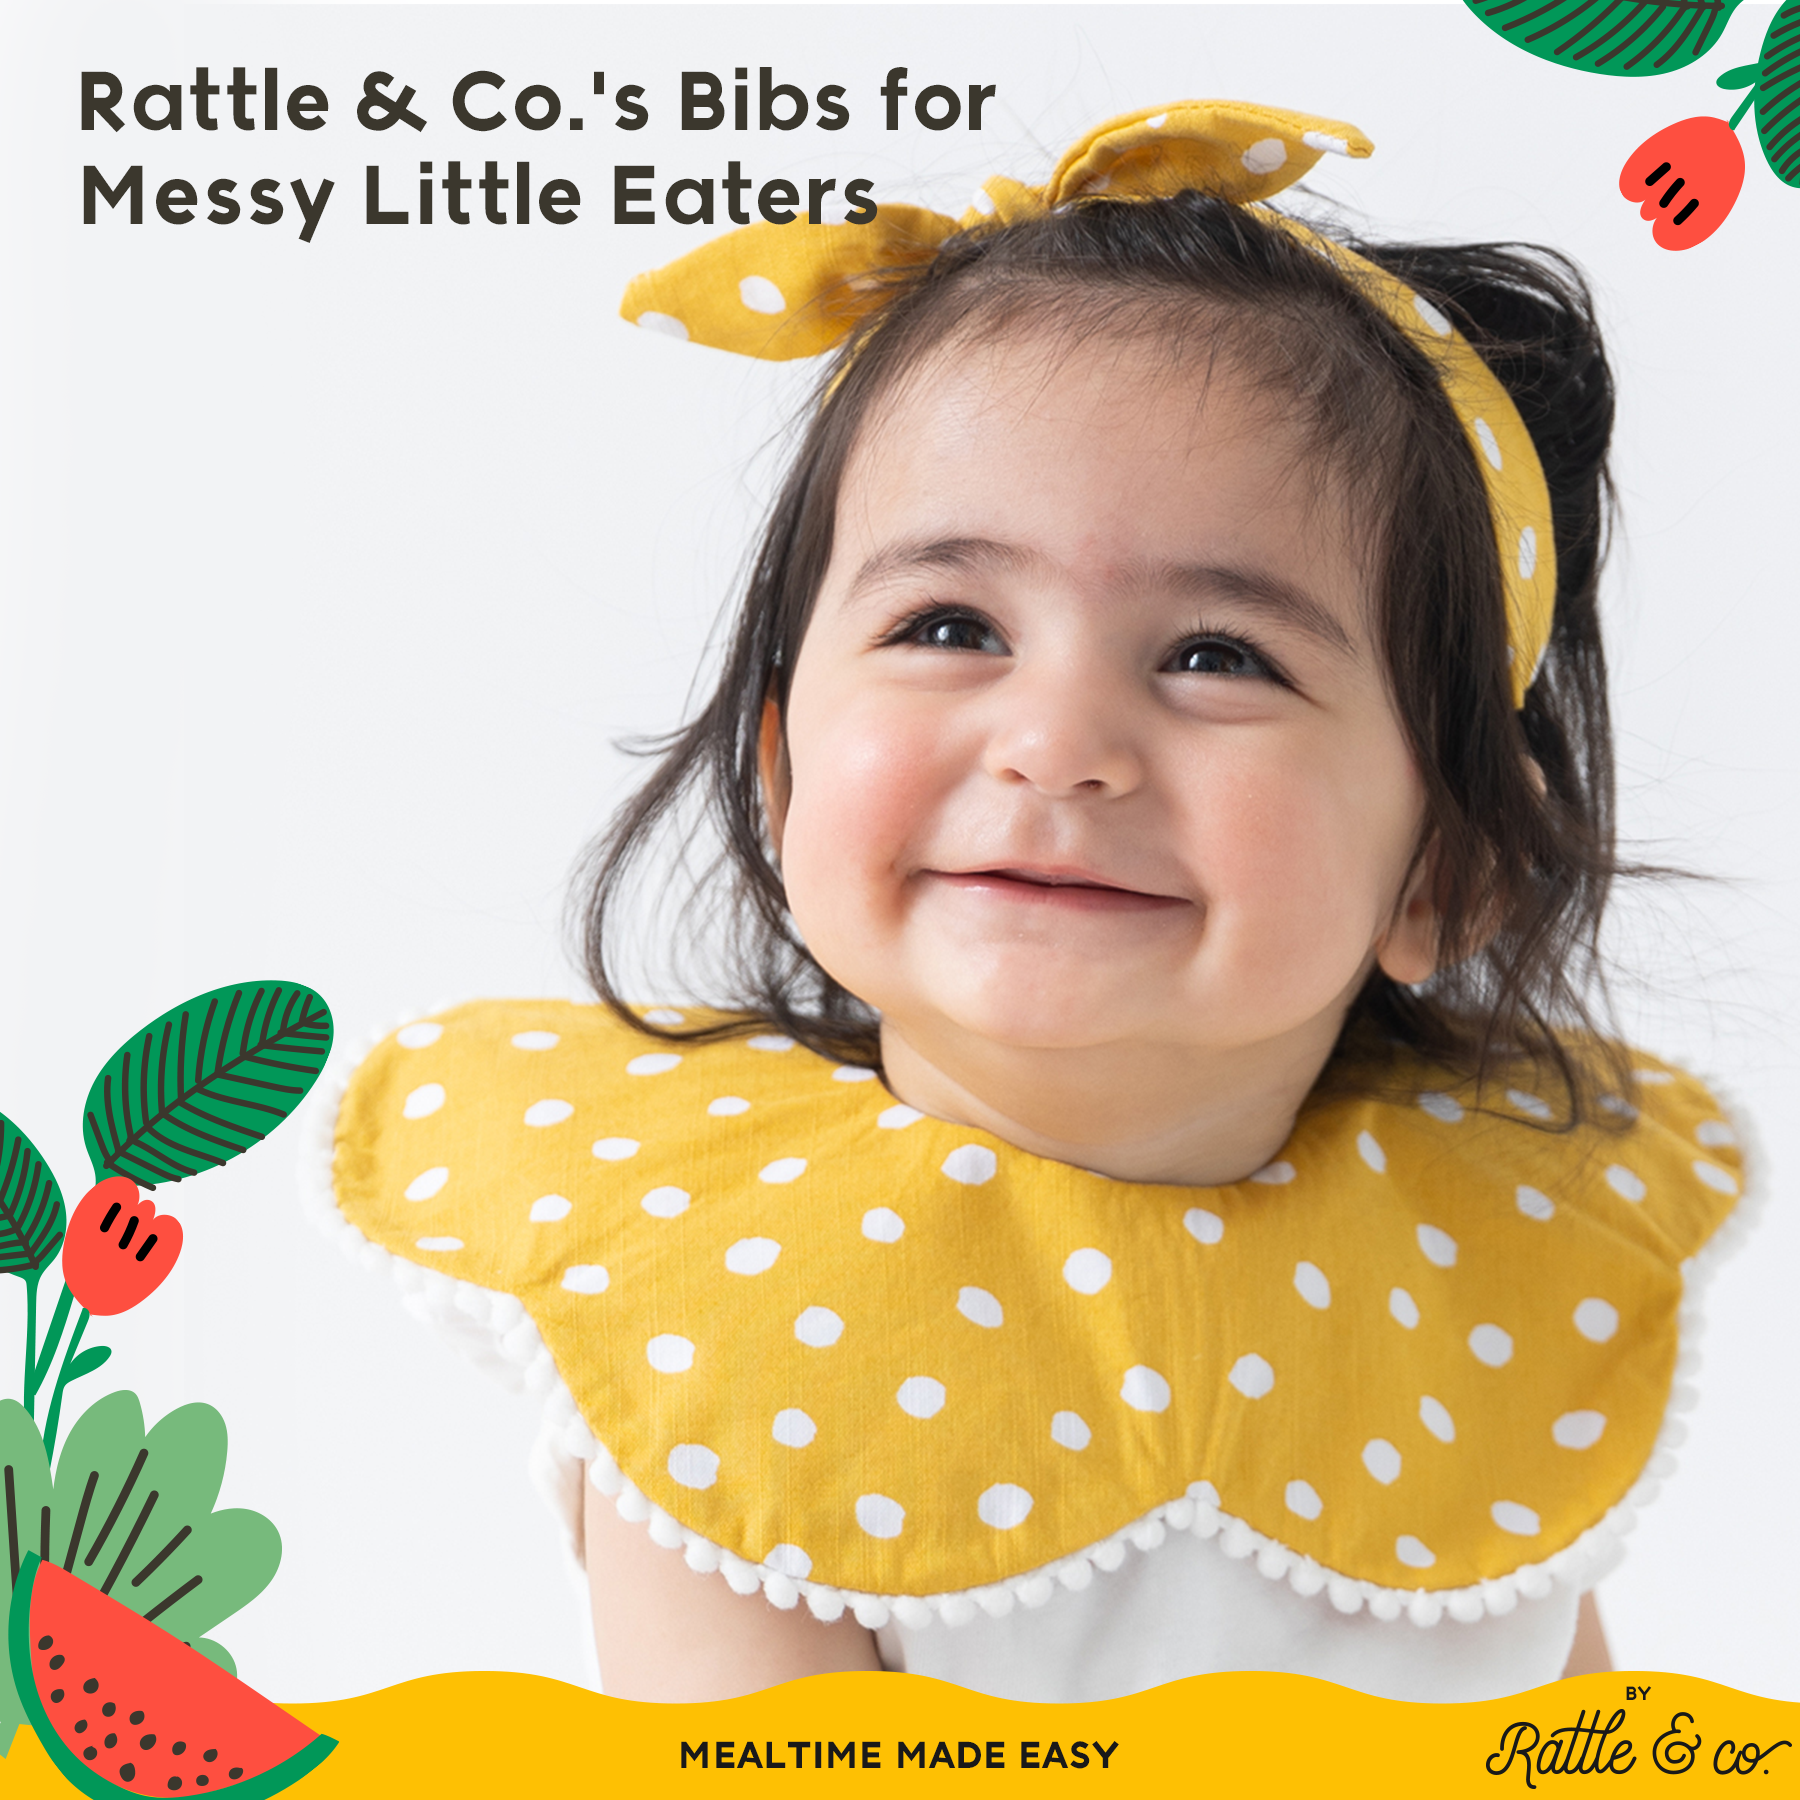 Mealtime Made Easy: Rattle & Co.'s Bibs for Messy Little Eaters